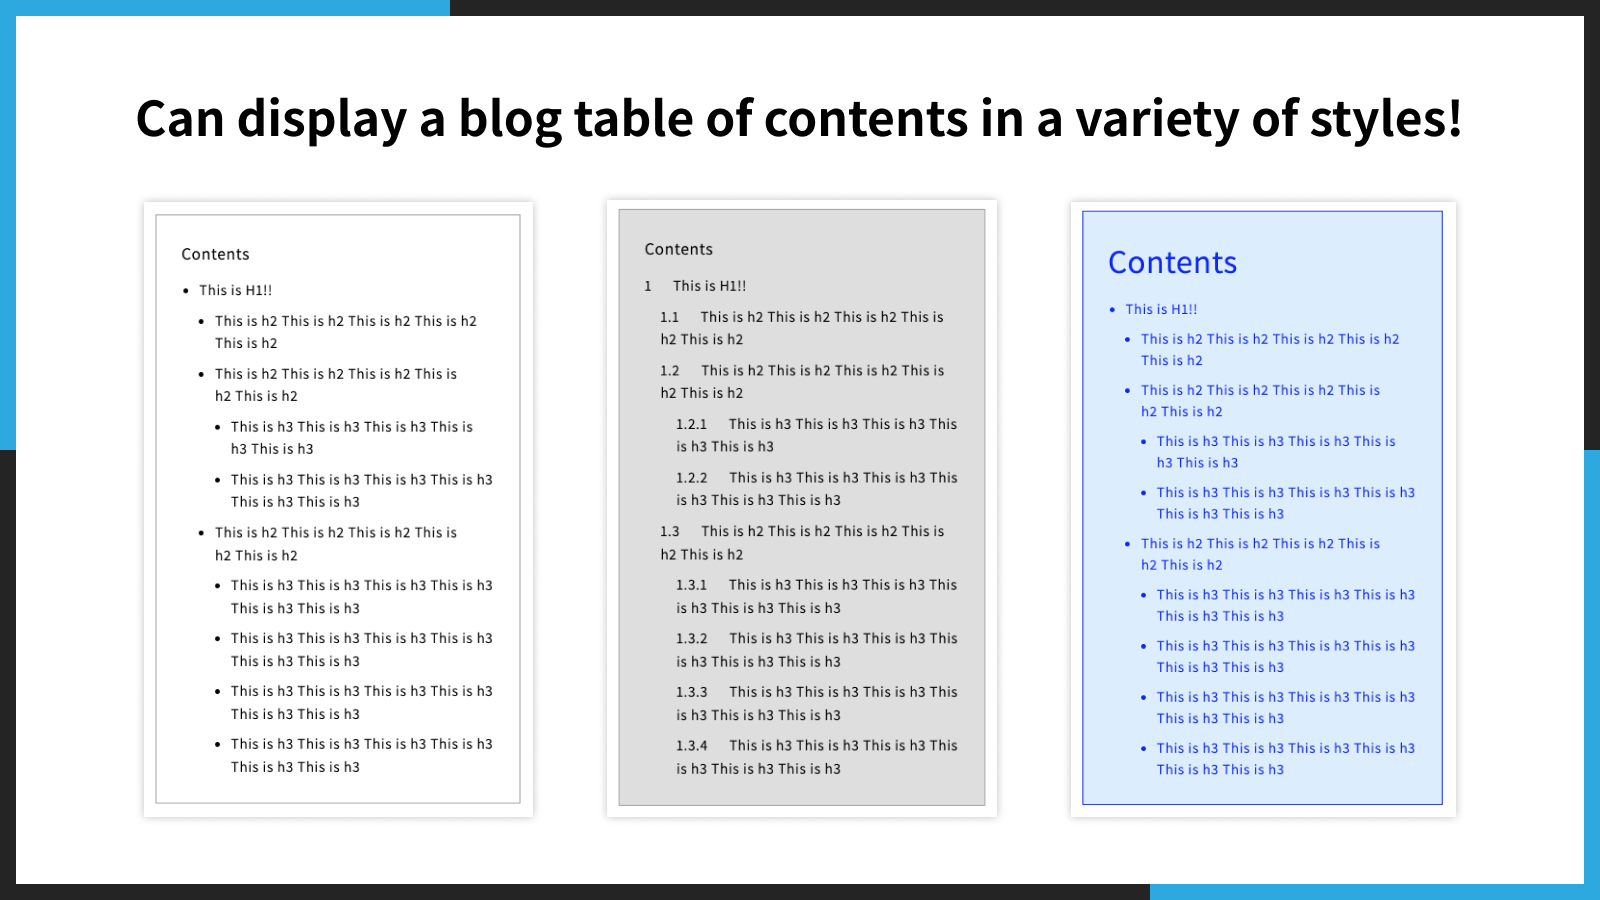 Can display a blog table of contents in a variety of styles